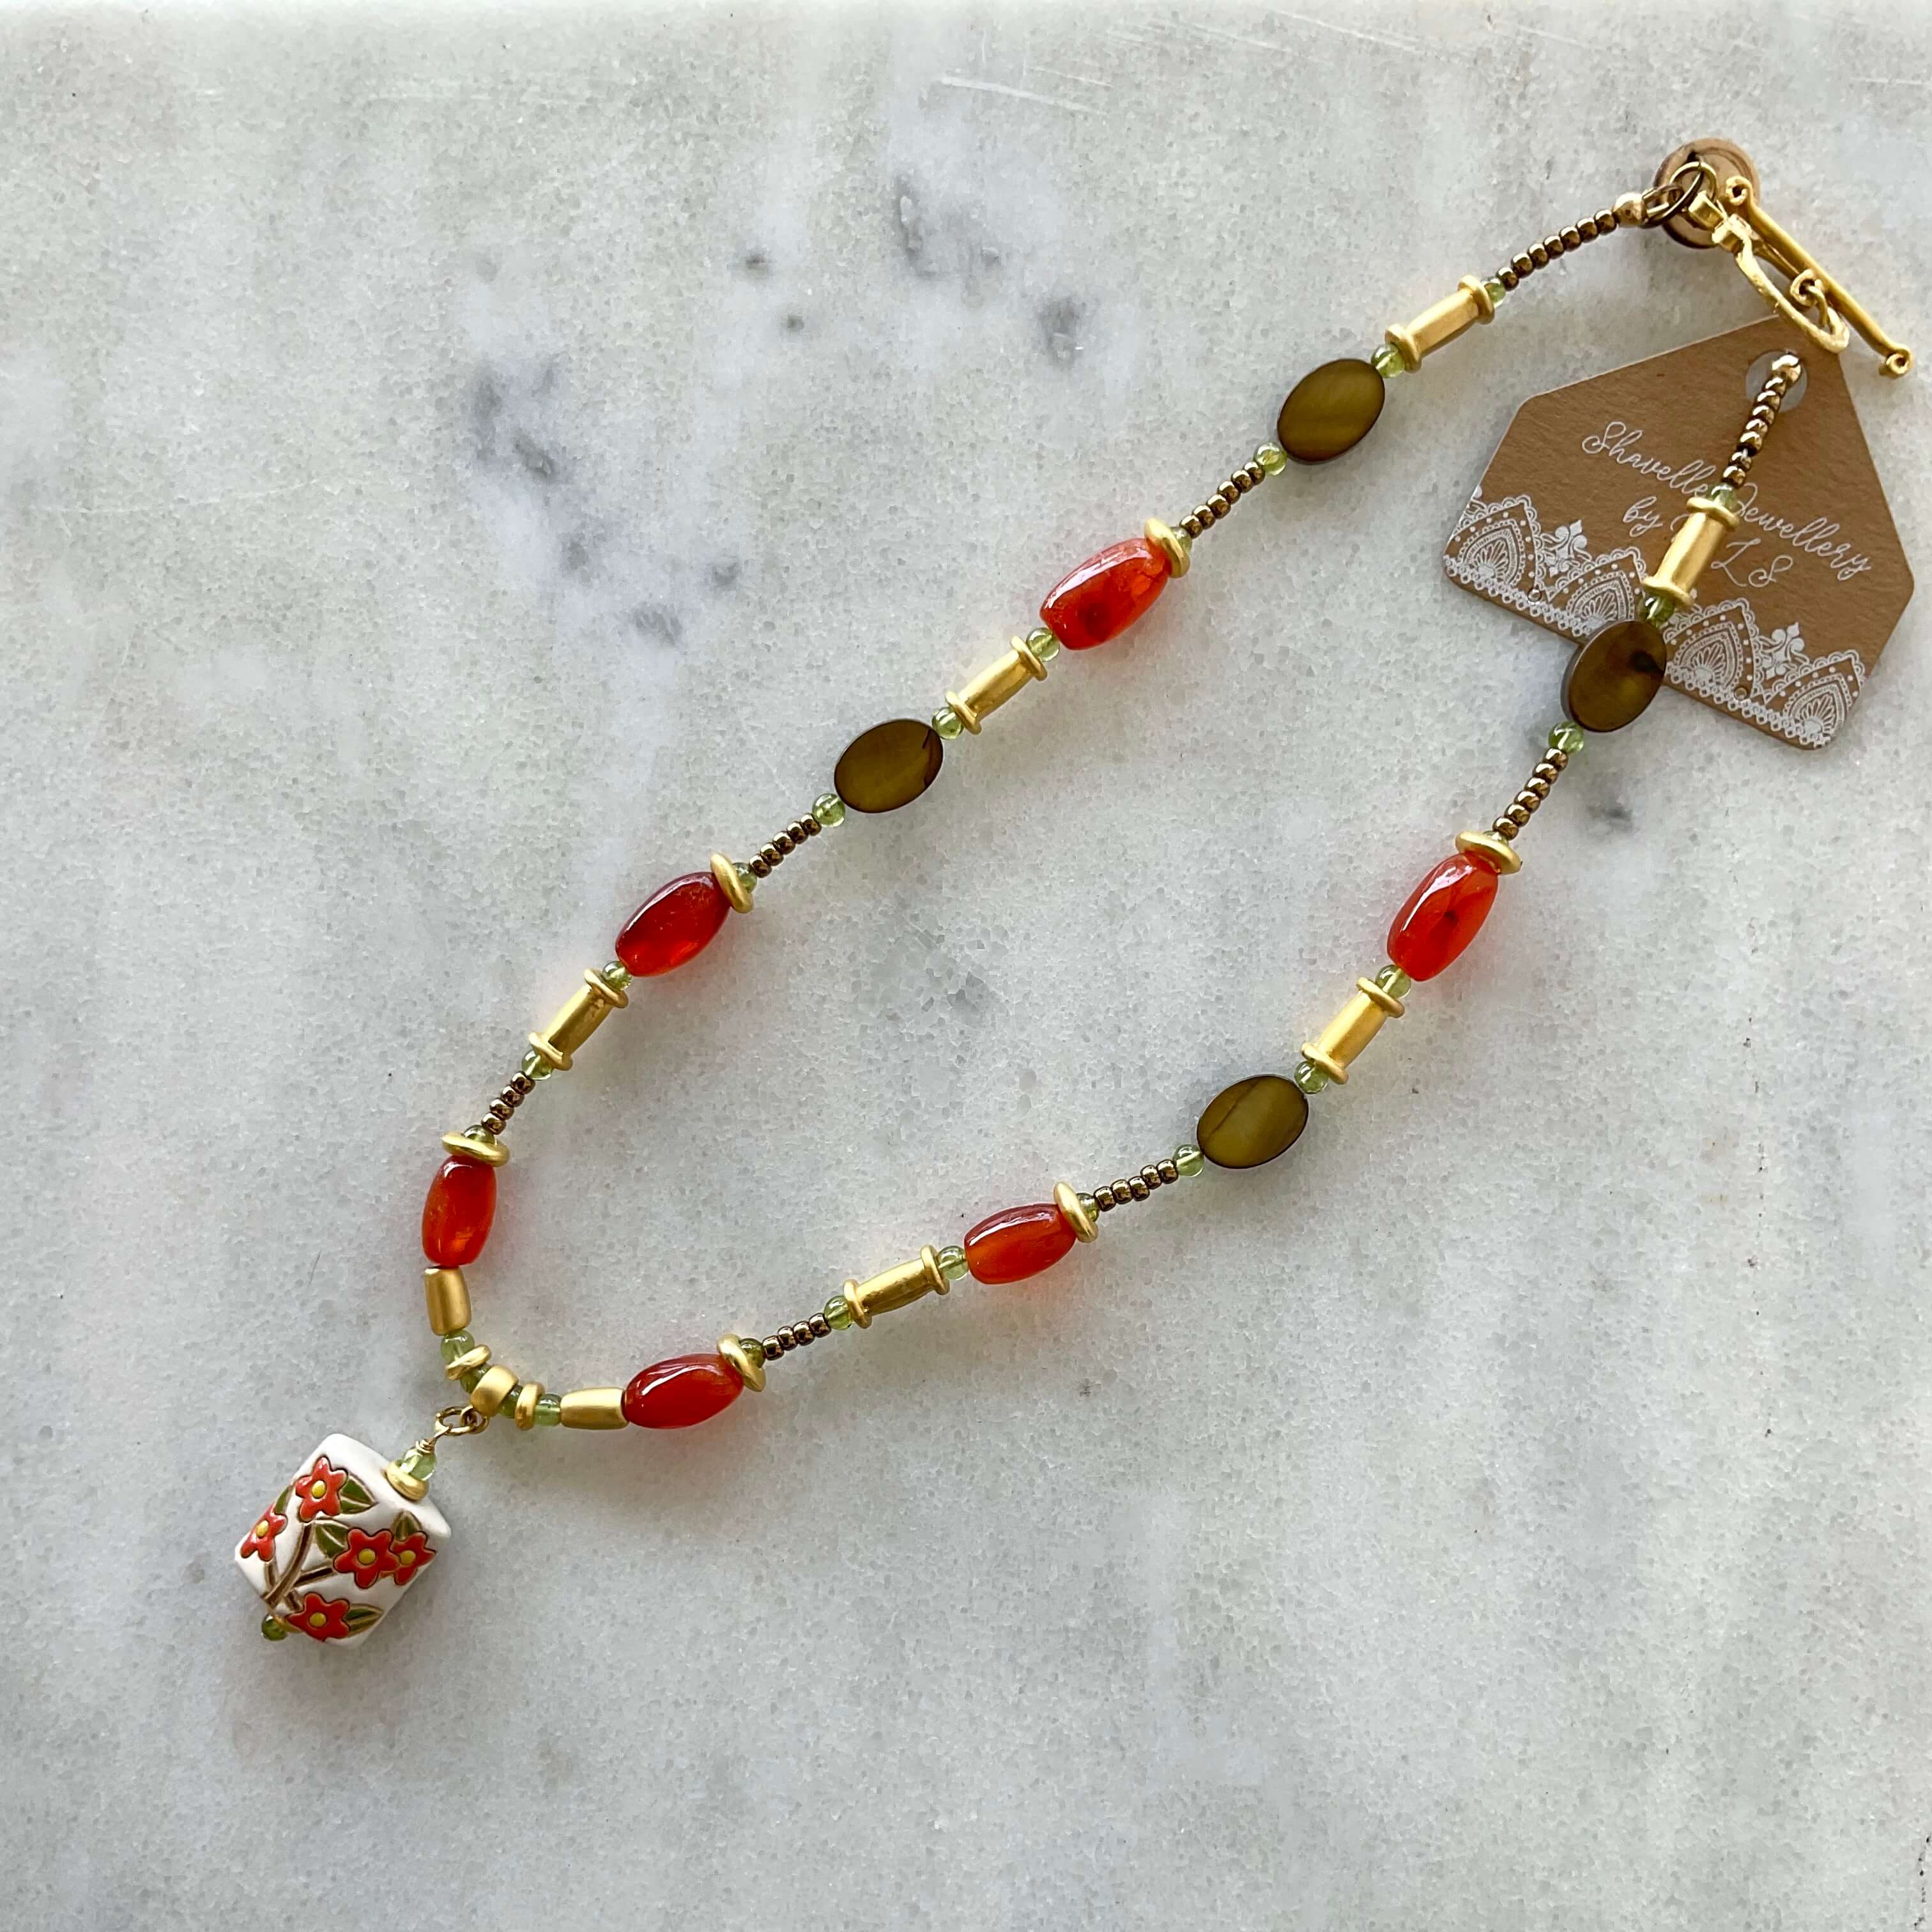 Carnelian, Peridot and 22kt gold plated Bead Necklace